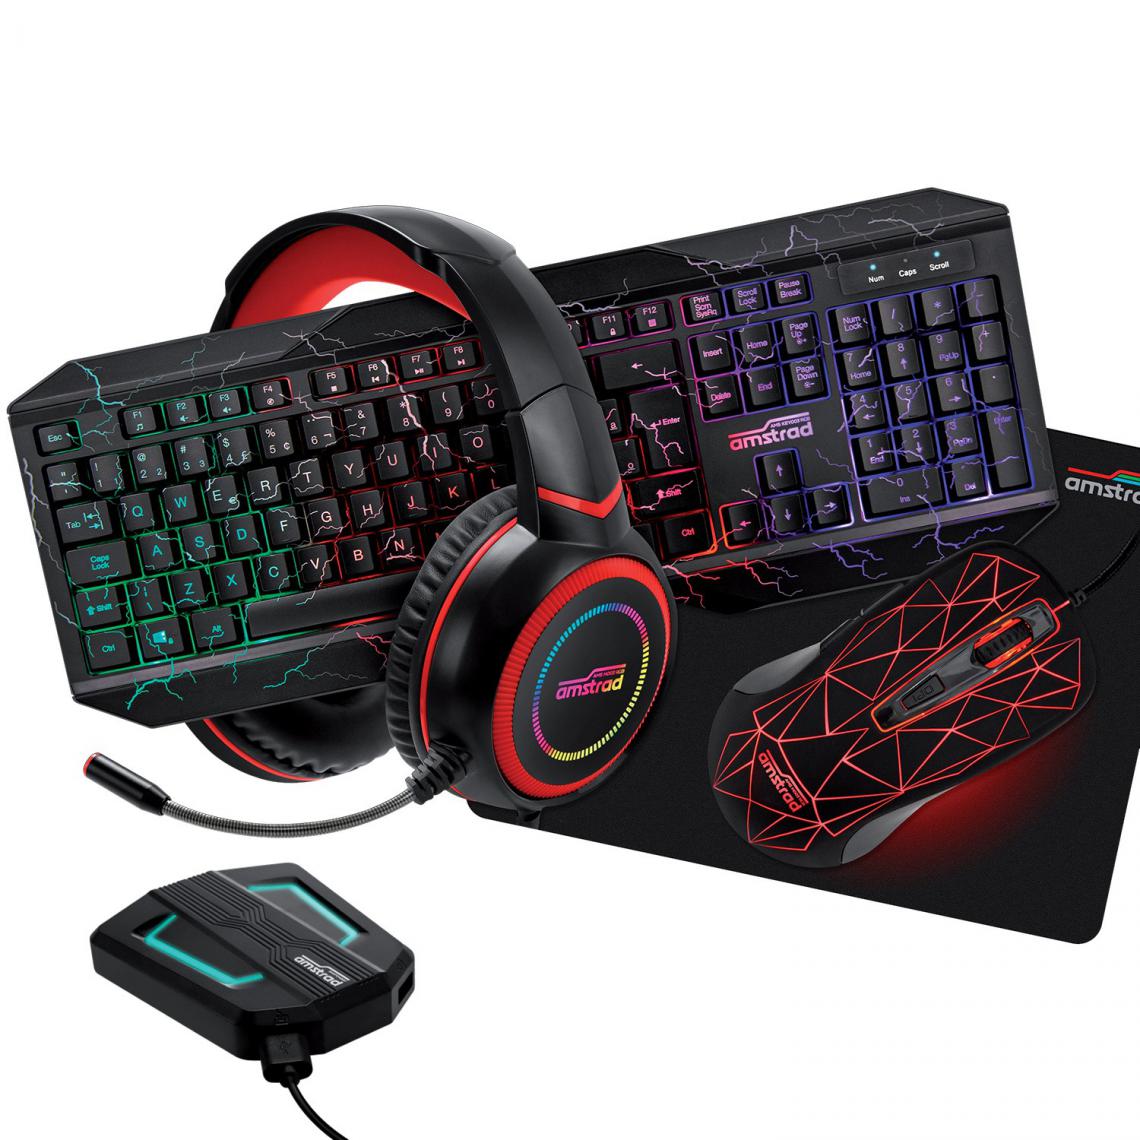 Amstrad - Pack Pro Gamer AMSTRAD SNIPERS-SWITCH007: Clavier, Souris, tapis, Casque & convertisseur PC - PS3/4 - XBOX 360/ONE/S/X - SWITCH - Souris